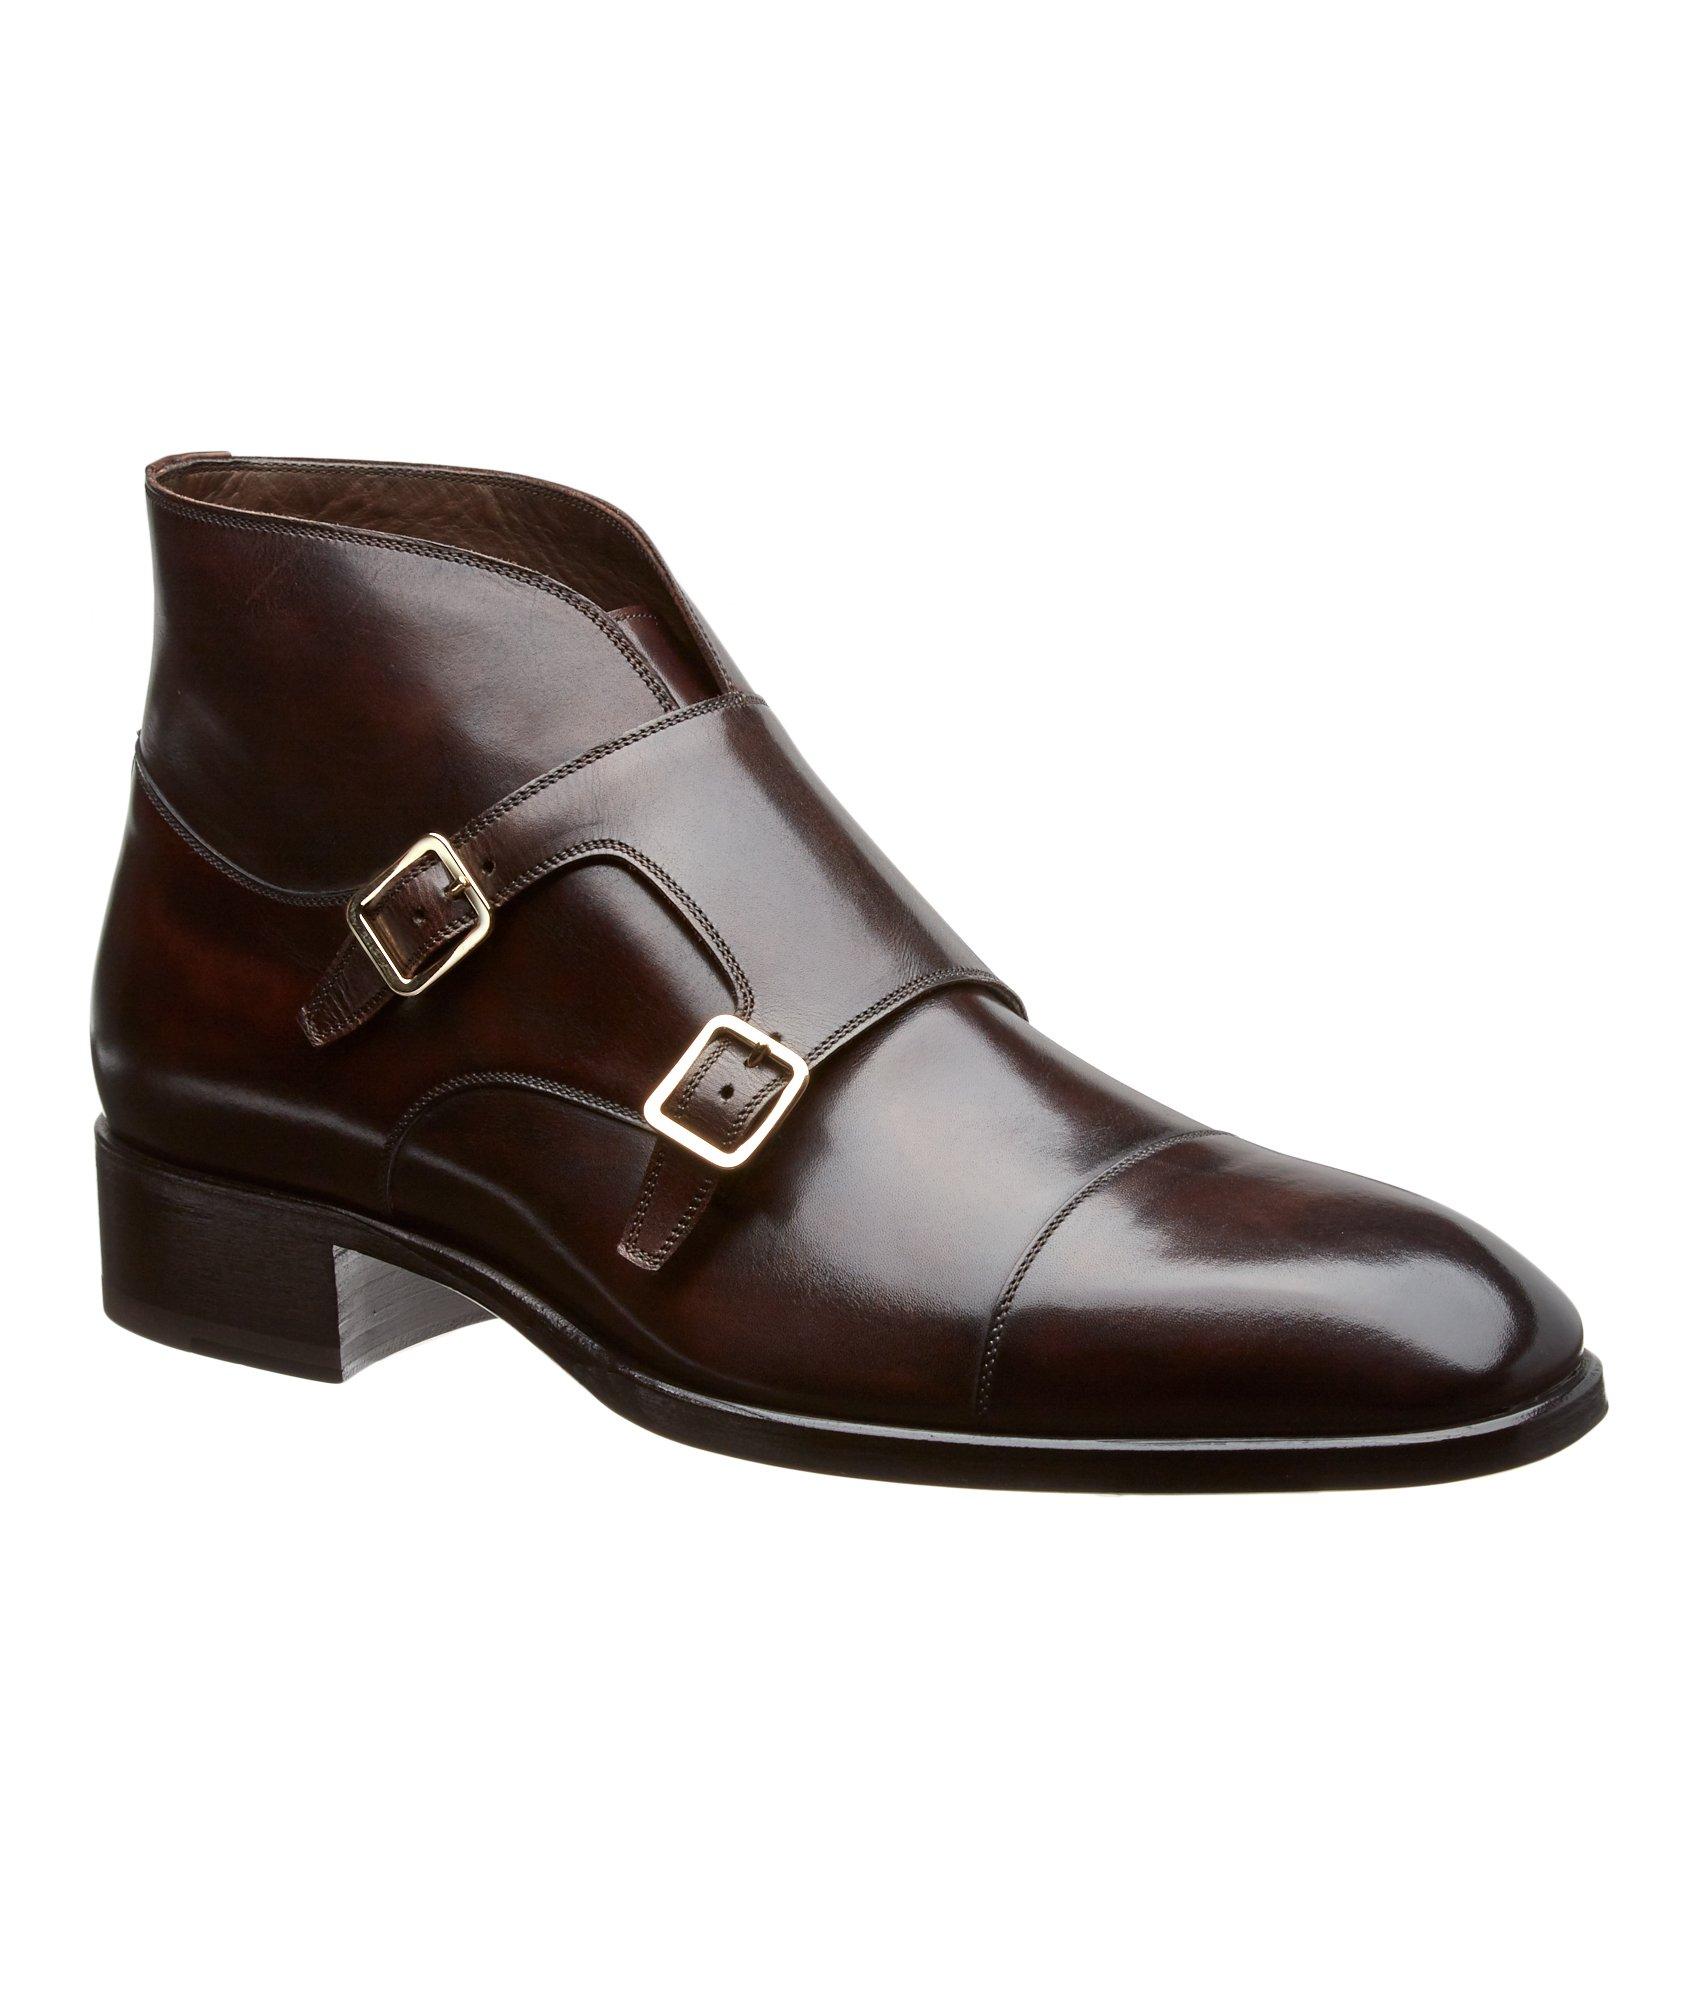 Leather Monk-Strap Boot image 0